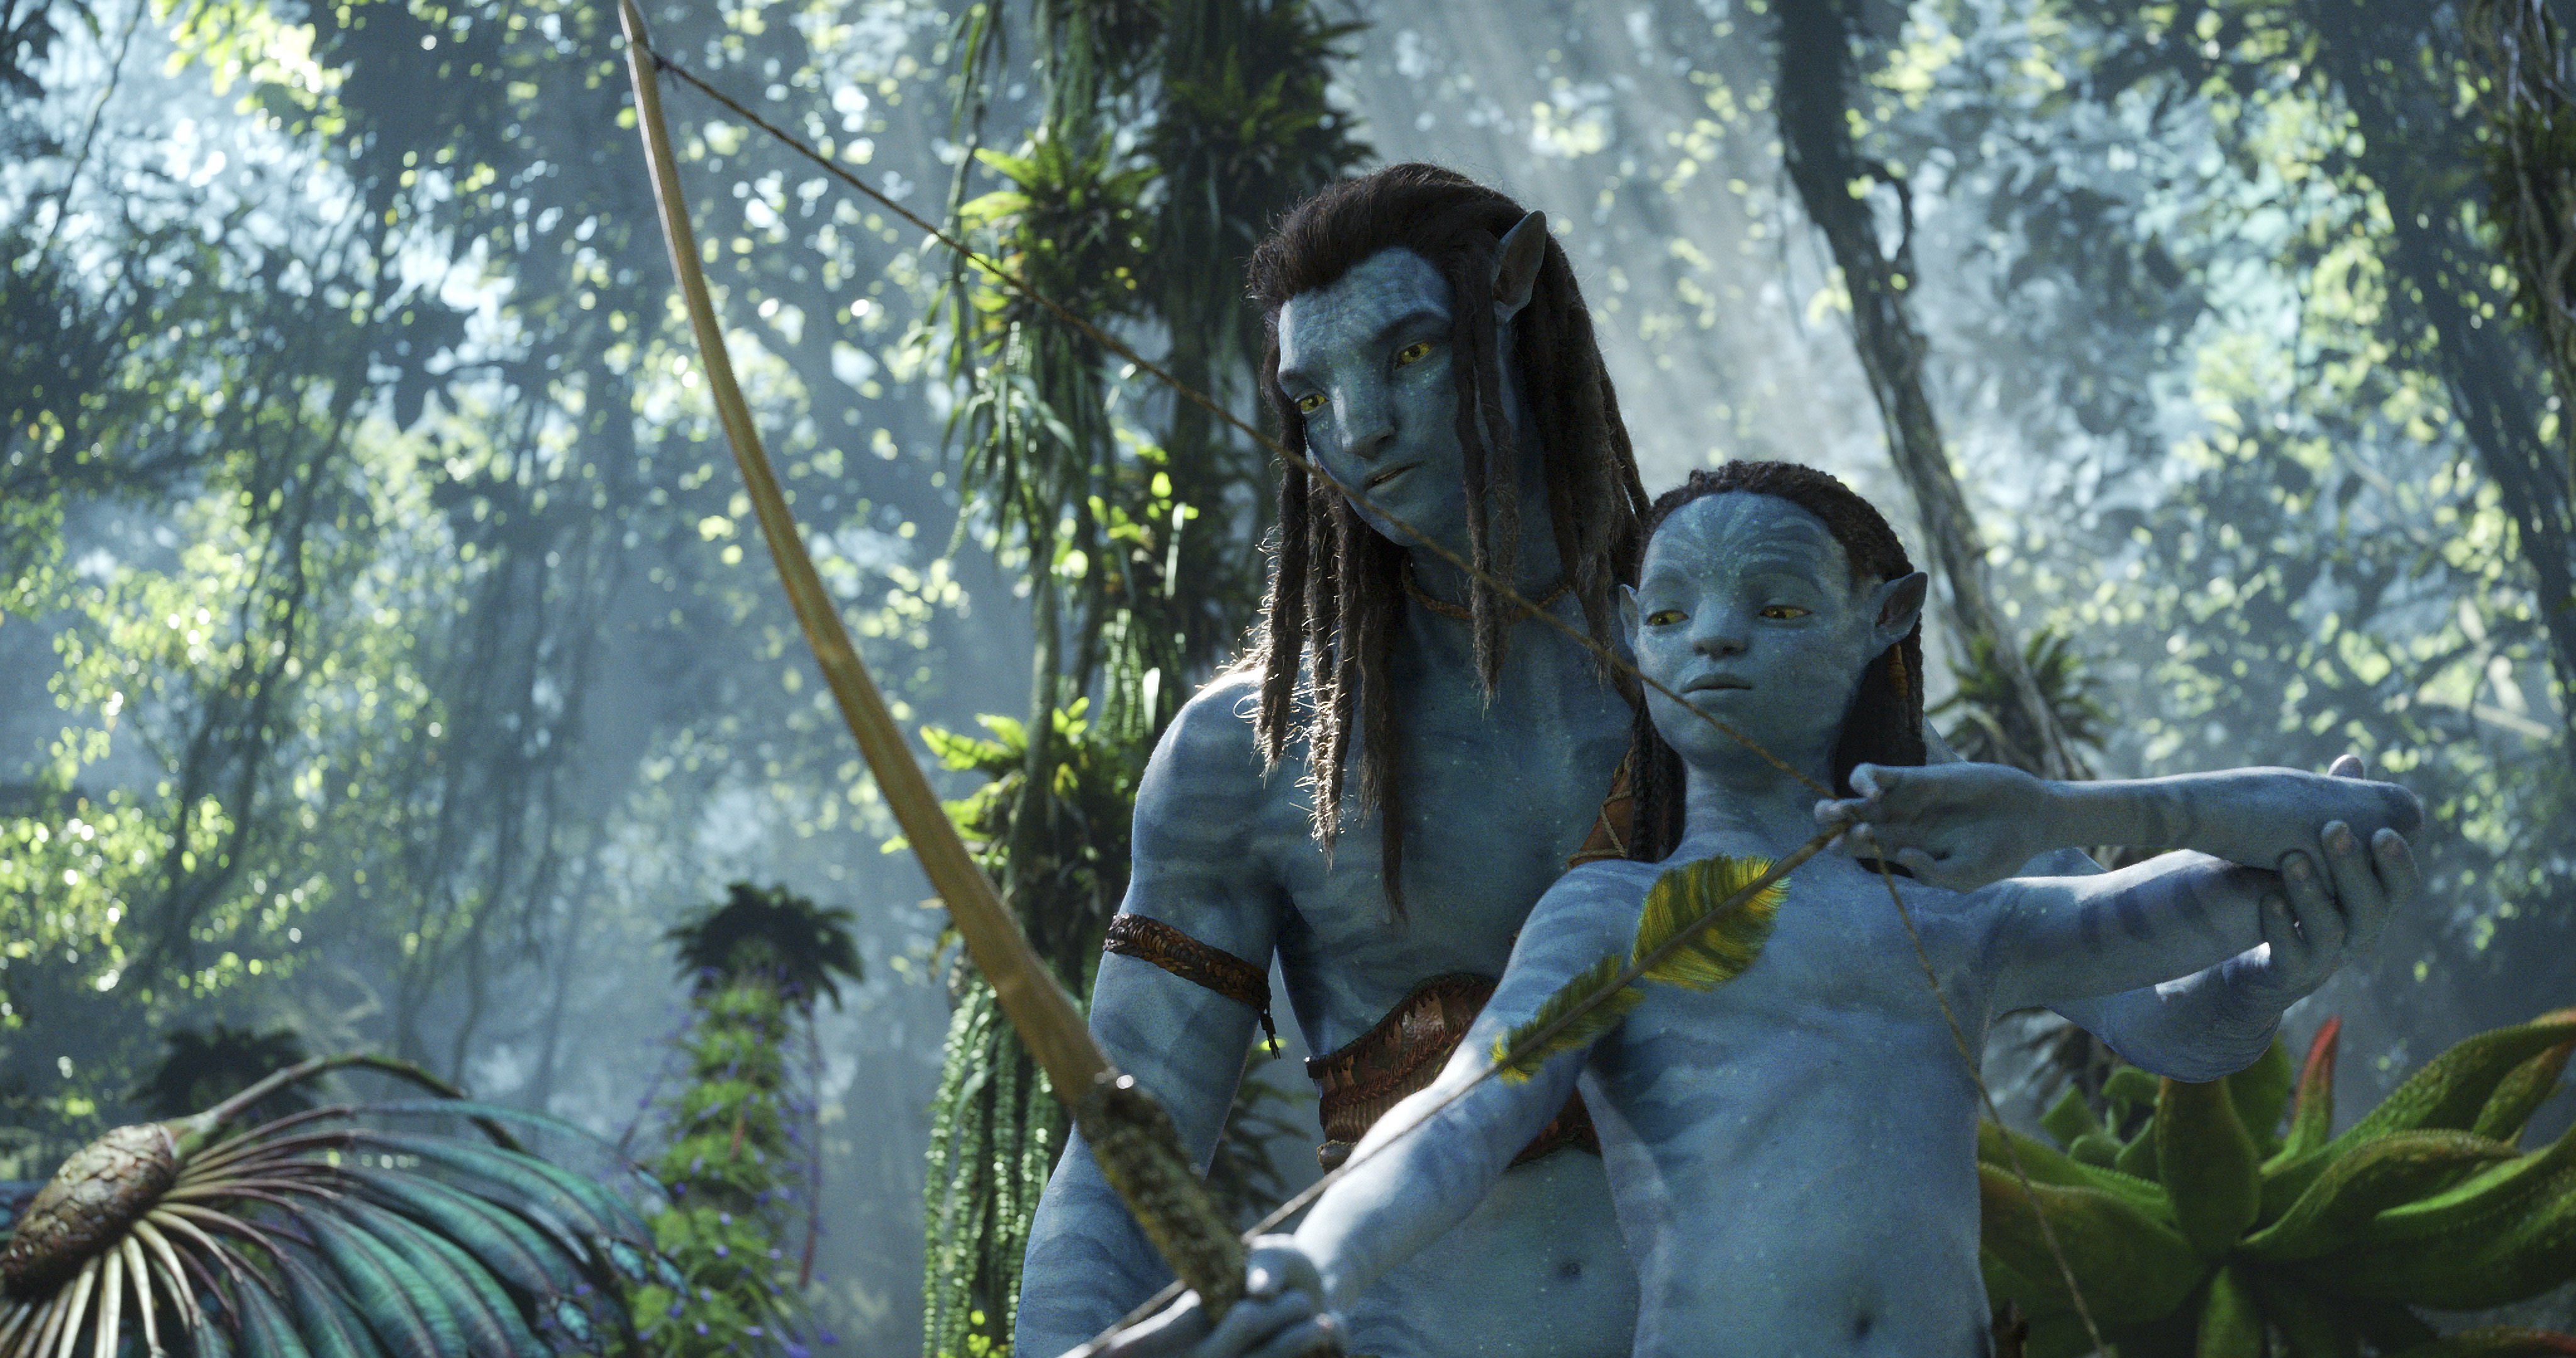 A still from Avatar: The Way of Water.